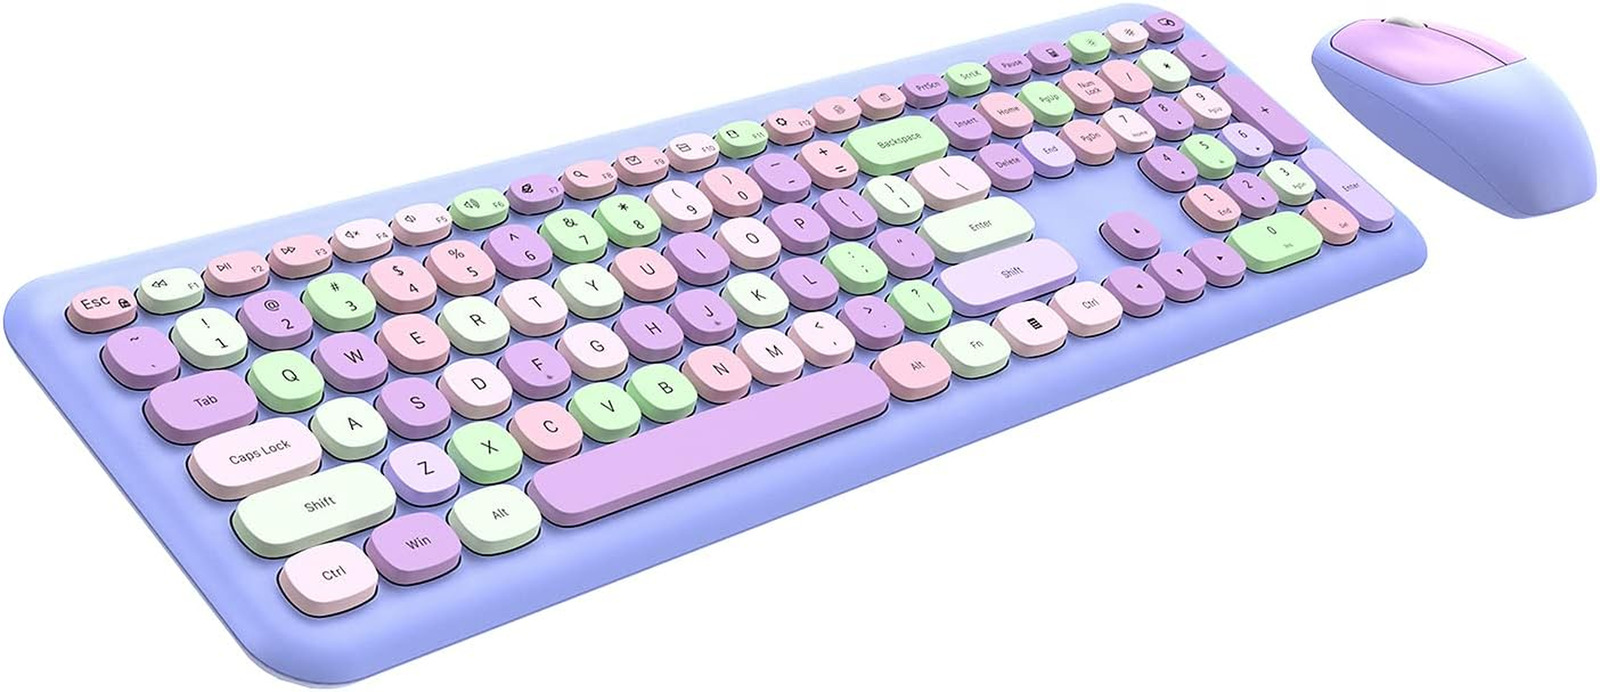 Wireless Keyboard and Mouse Combo, 2.4GHz Full-Sized Colorful Cute Keyboard Mous